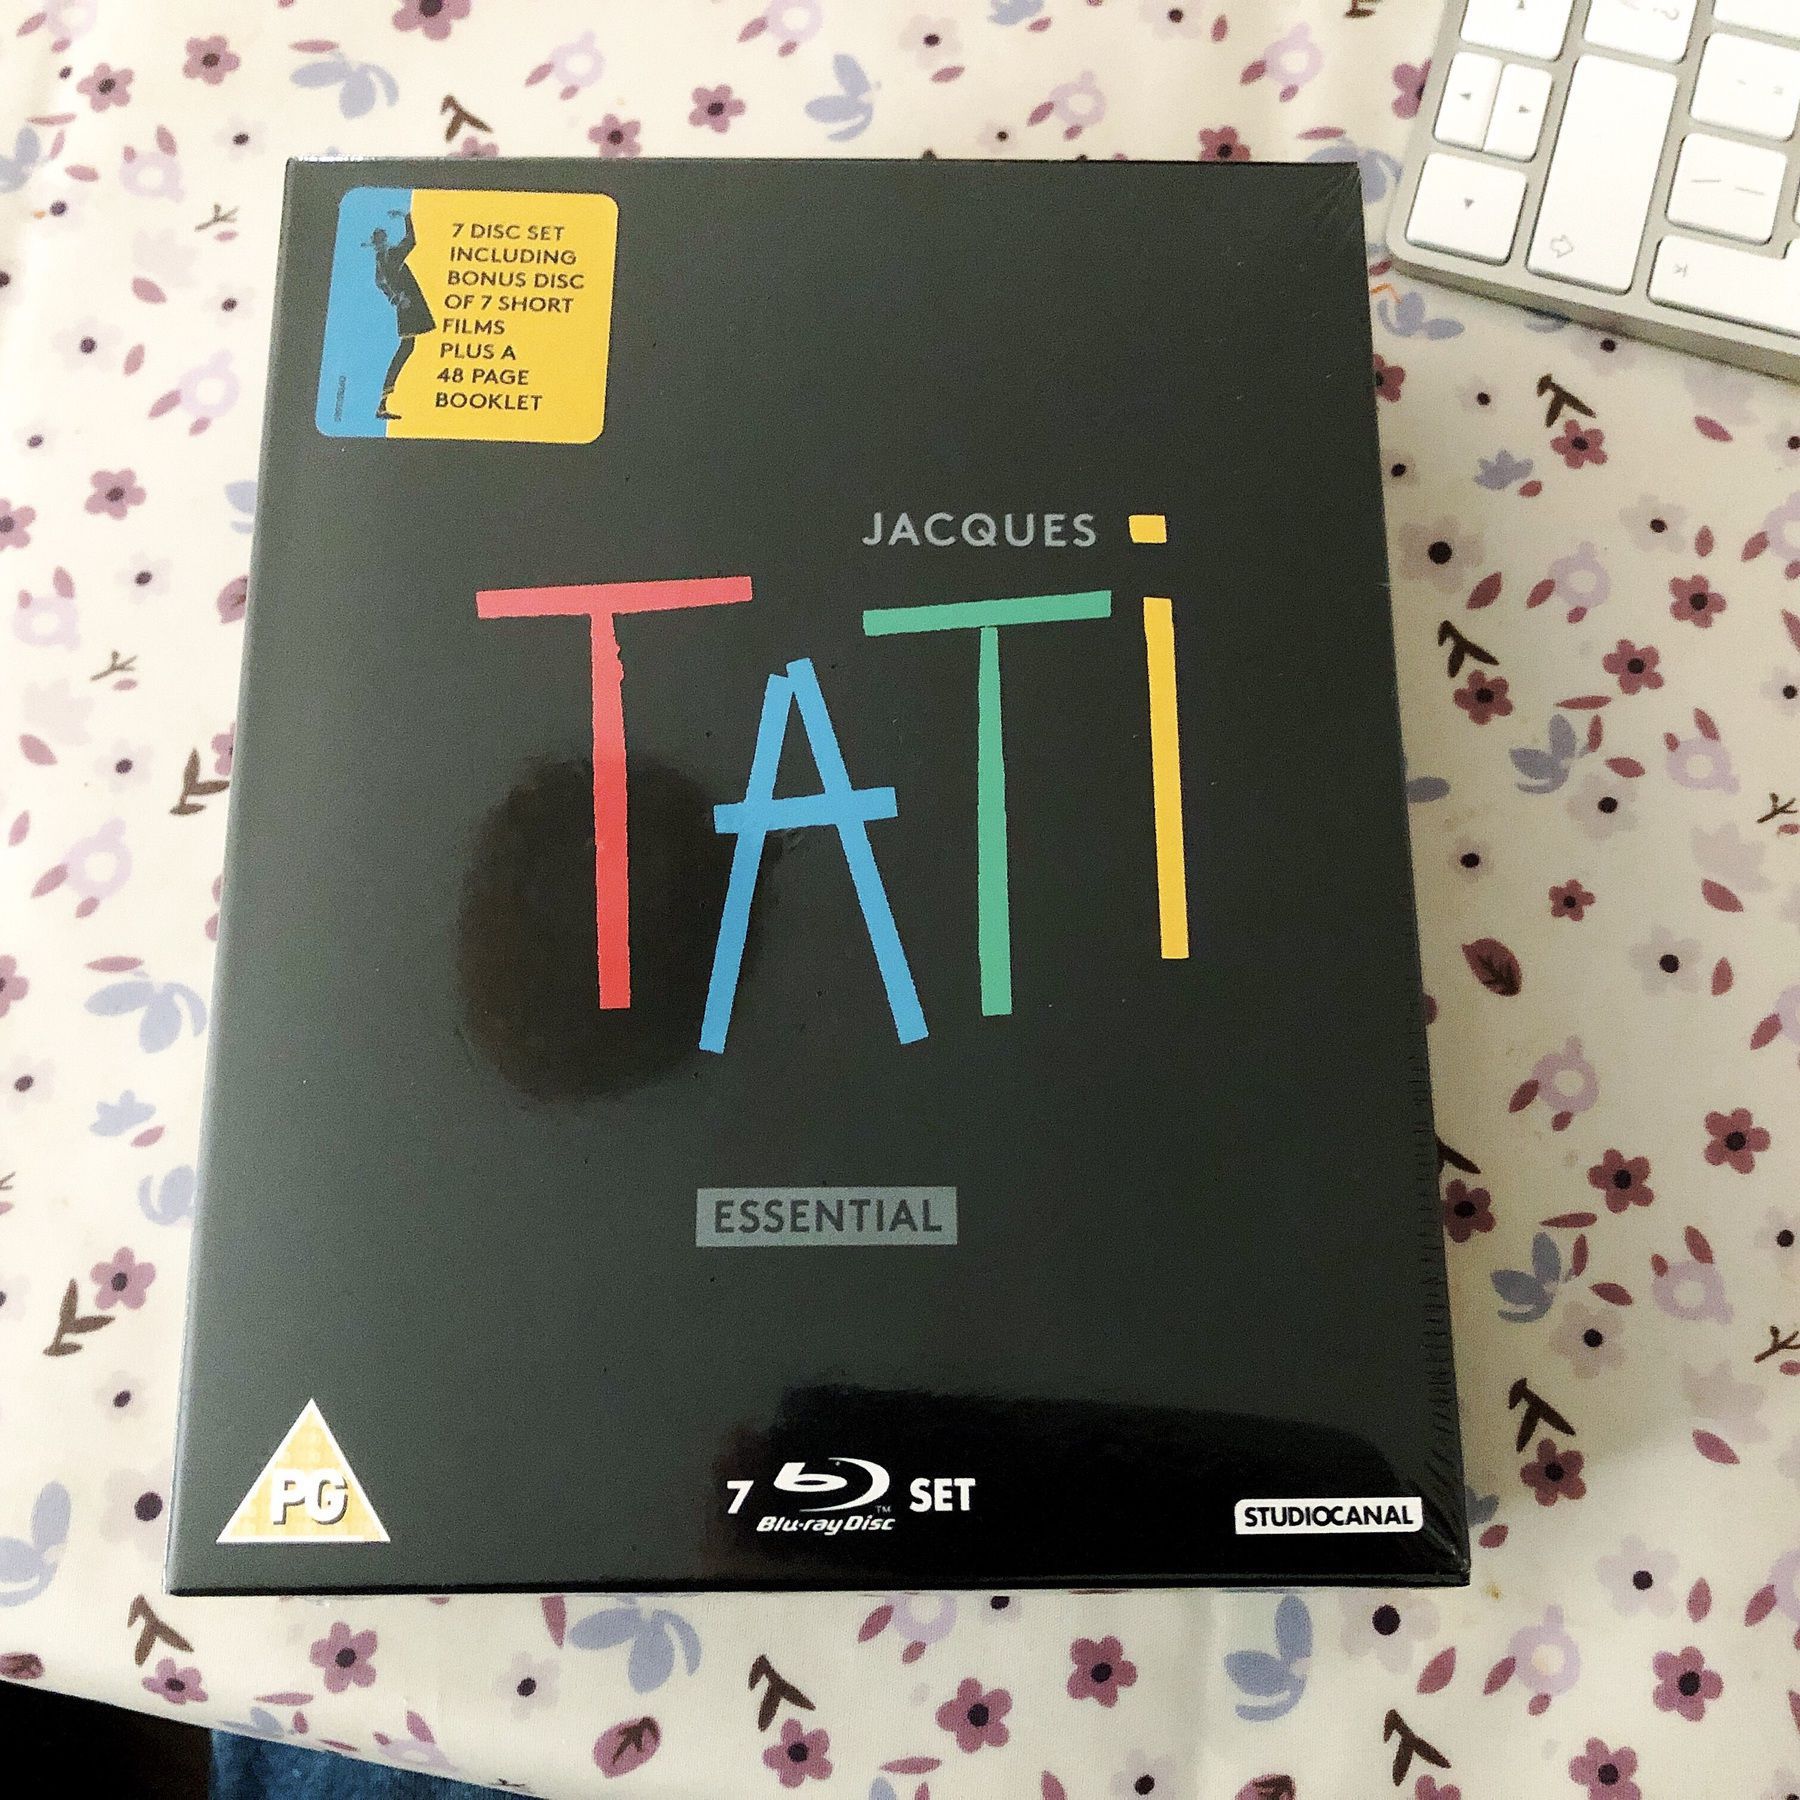 Jaques Tati DVD collection